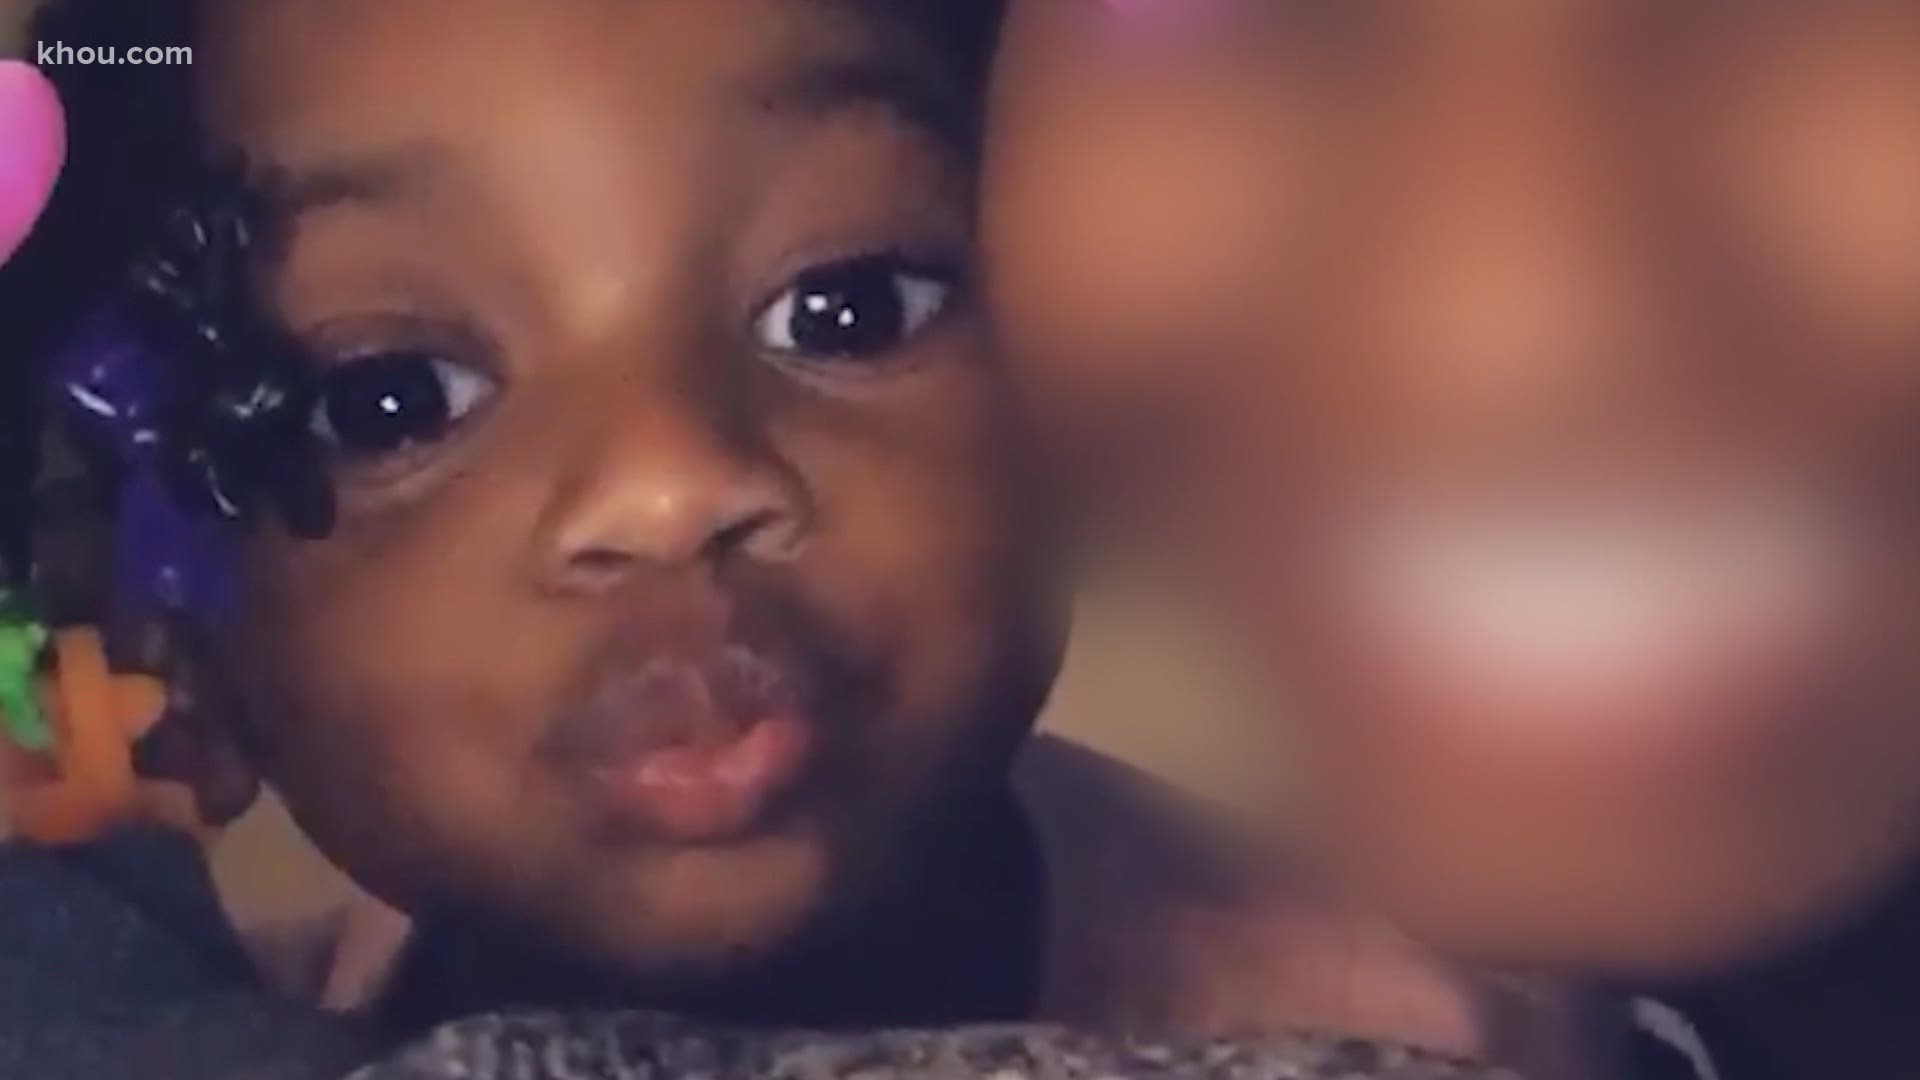 Octavious Bass lives in Dallas, but he is demanding justice after his 2-year-old daughter Maliyah was found dead in a Houston bayou a little more than a week ago.